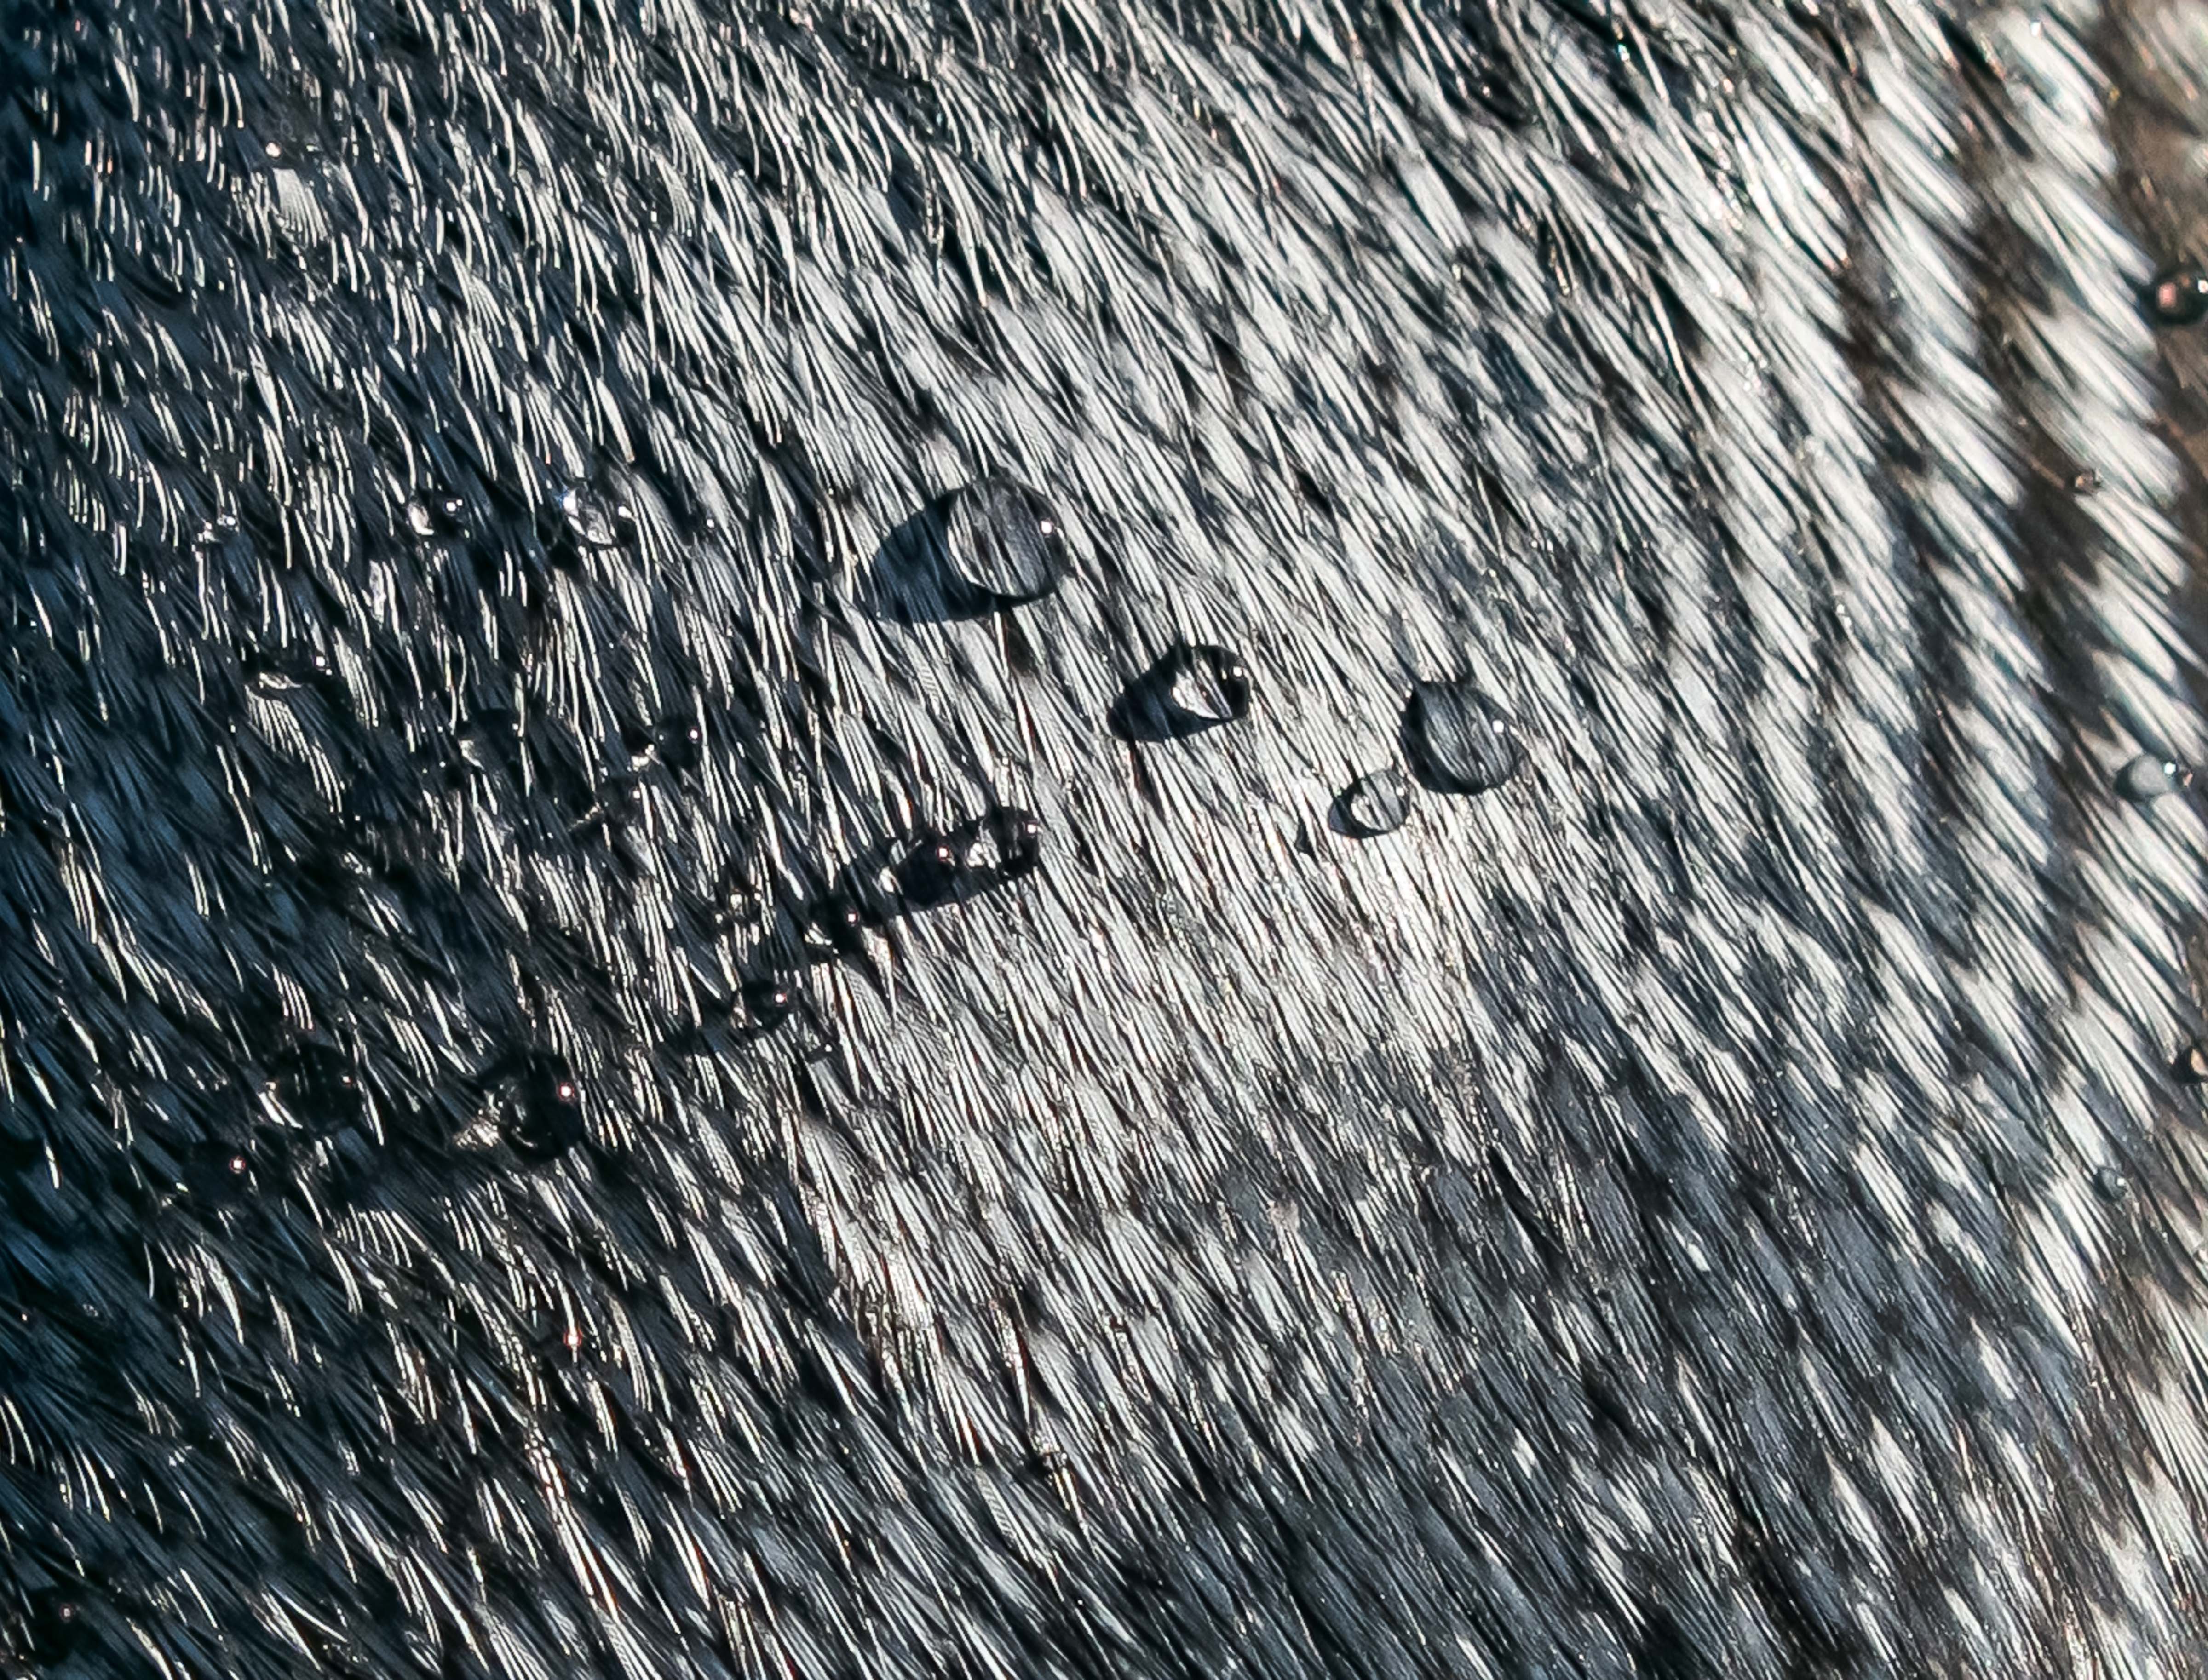 South Georgia, Gold Harbor, Water Droplets On Penguin Wing, 2006